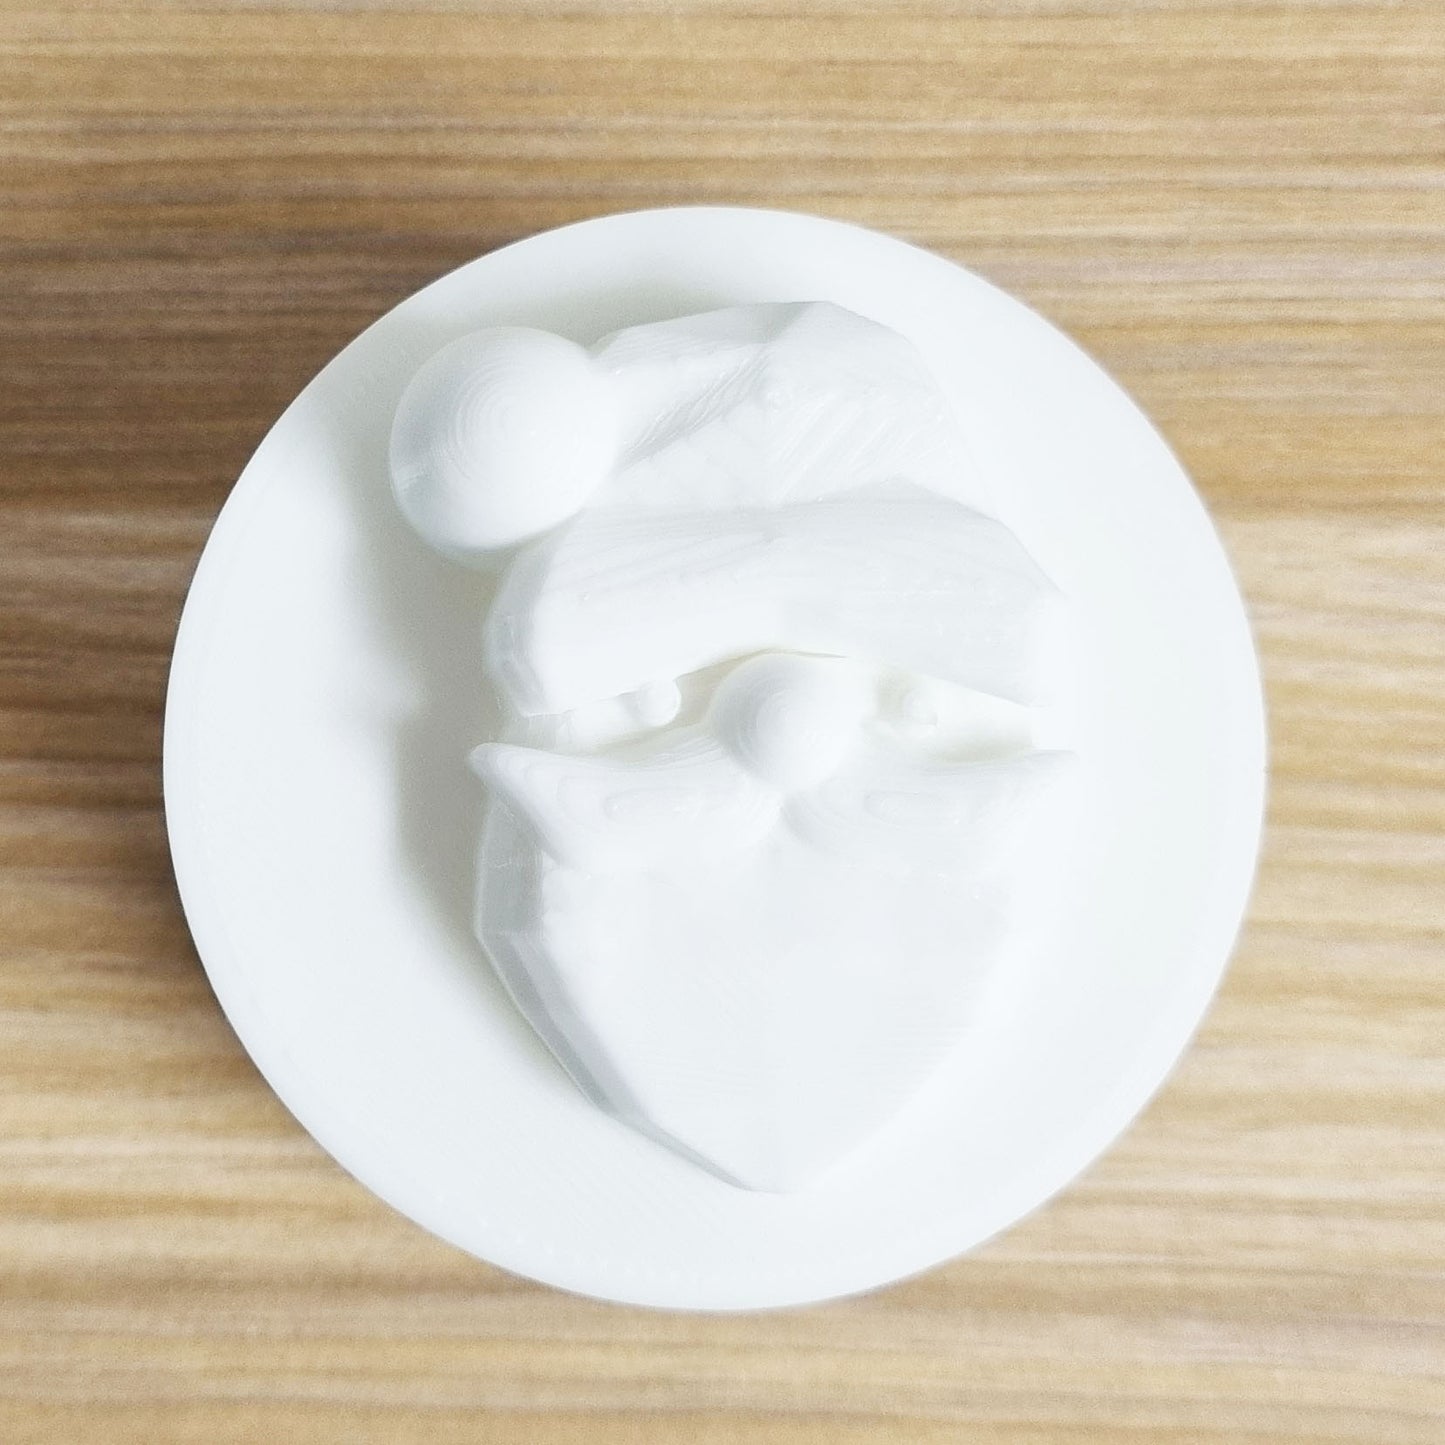 Santa Face Advent Mould | Truly Personal | Bath Bomb, Soap, Resin, Chocolate, Jelly, Wax Melts Mold